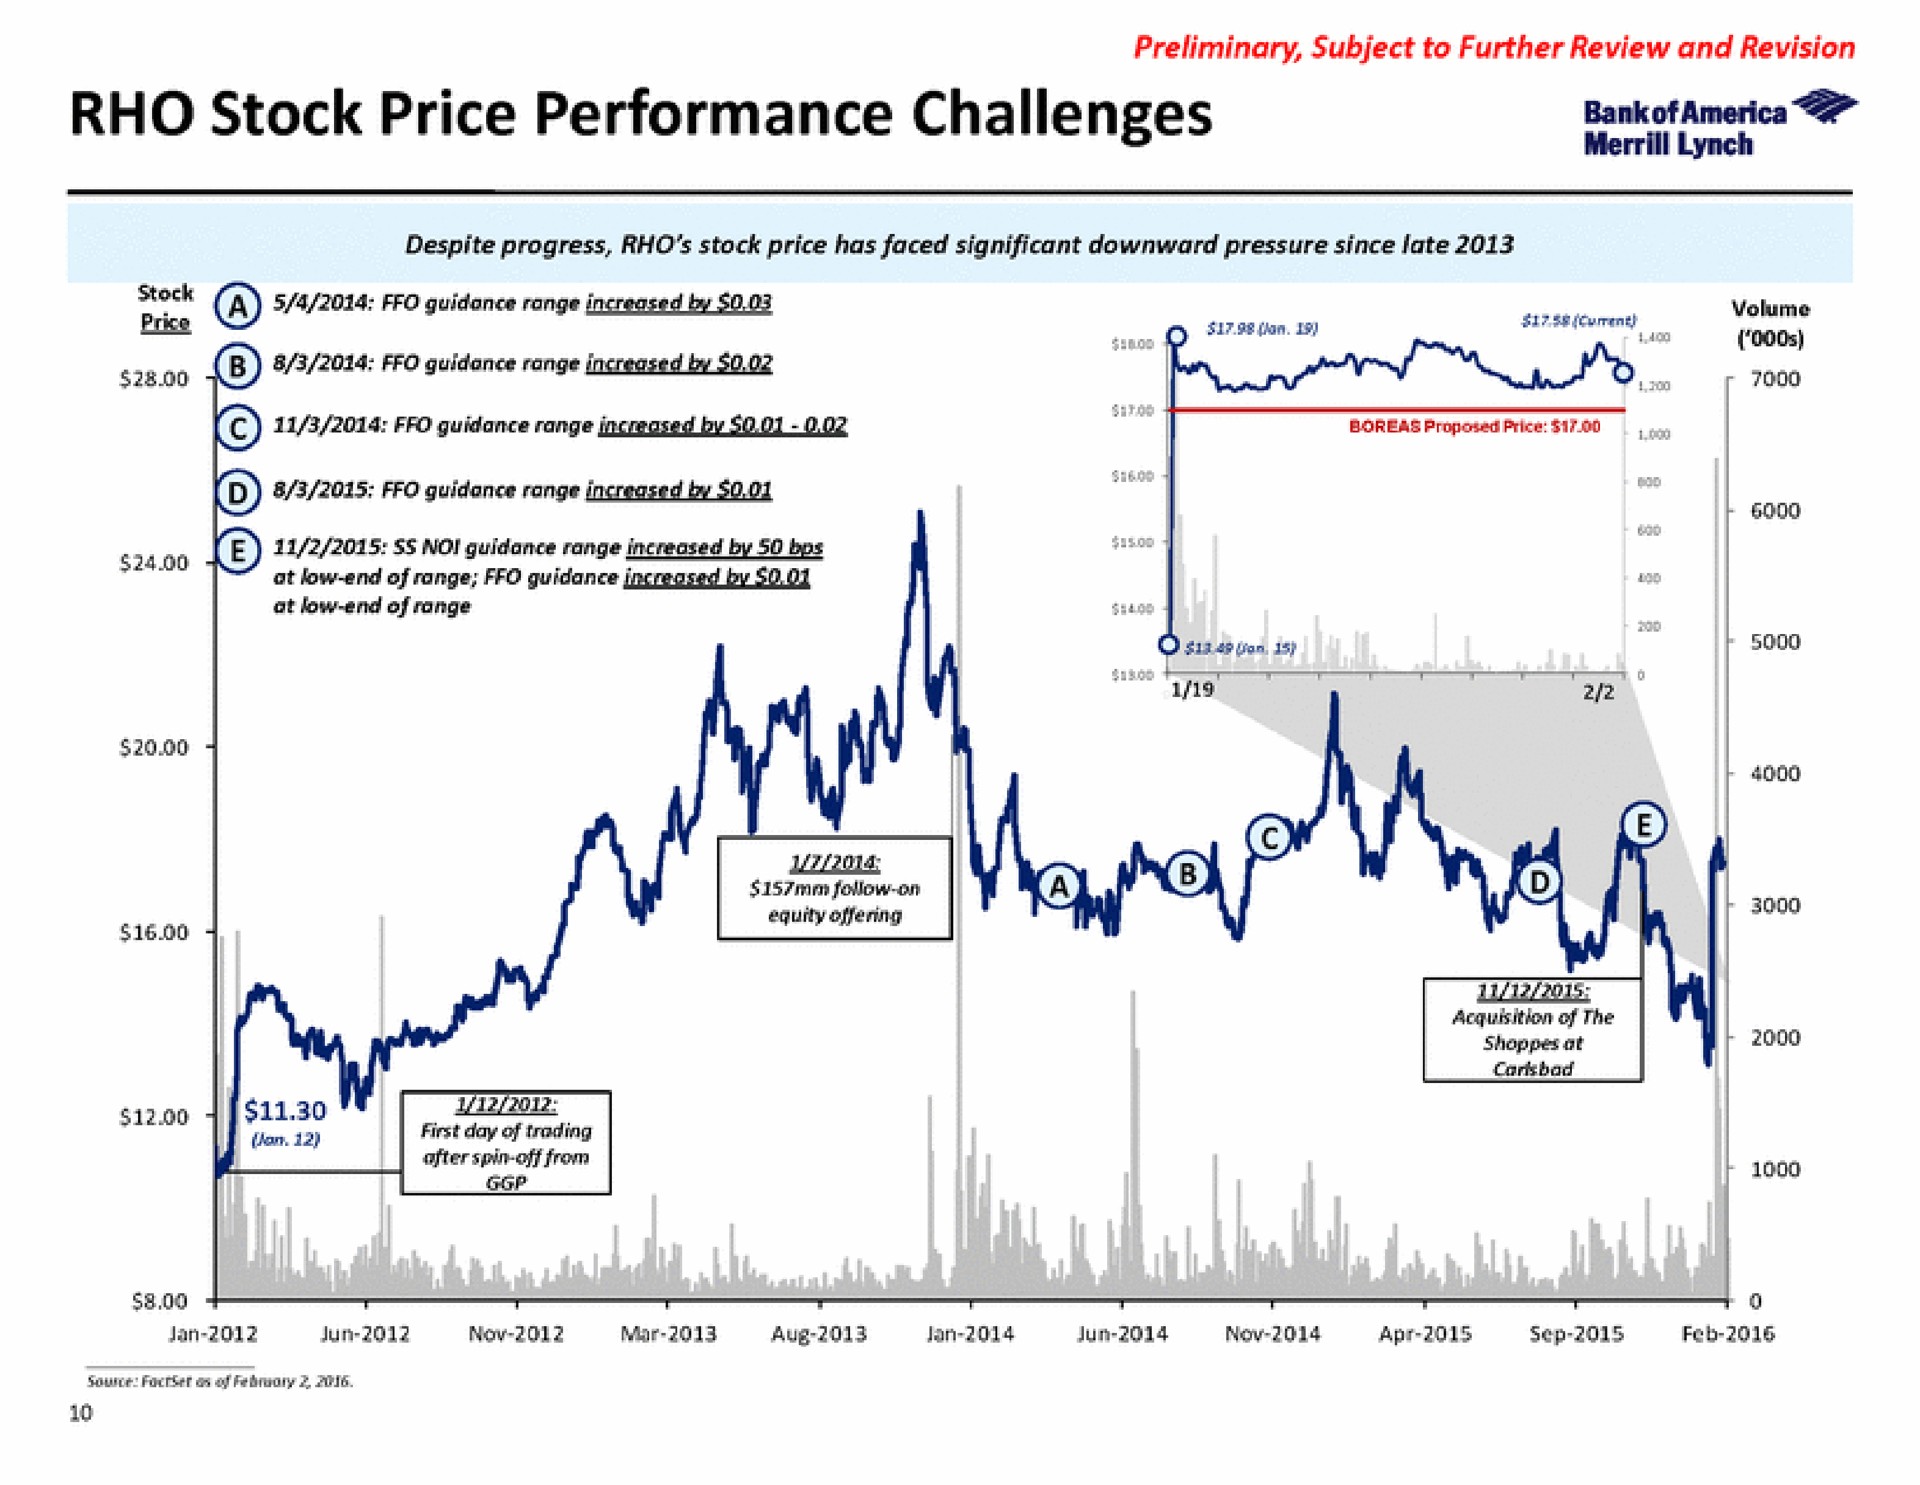 rho stock price performance challenges so | Bank of America